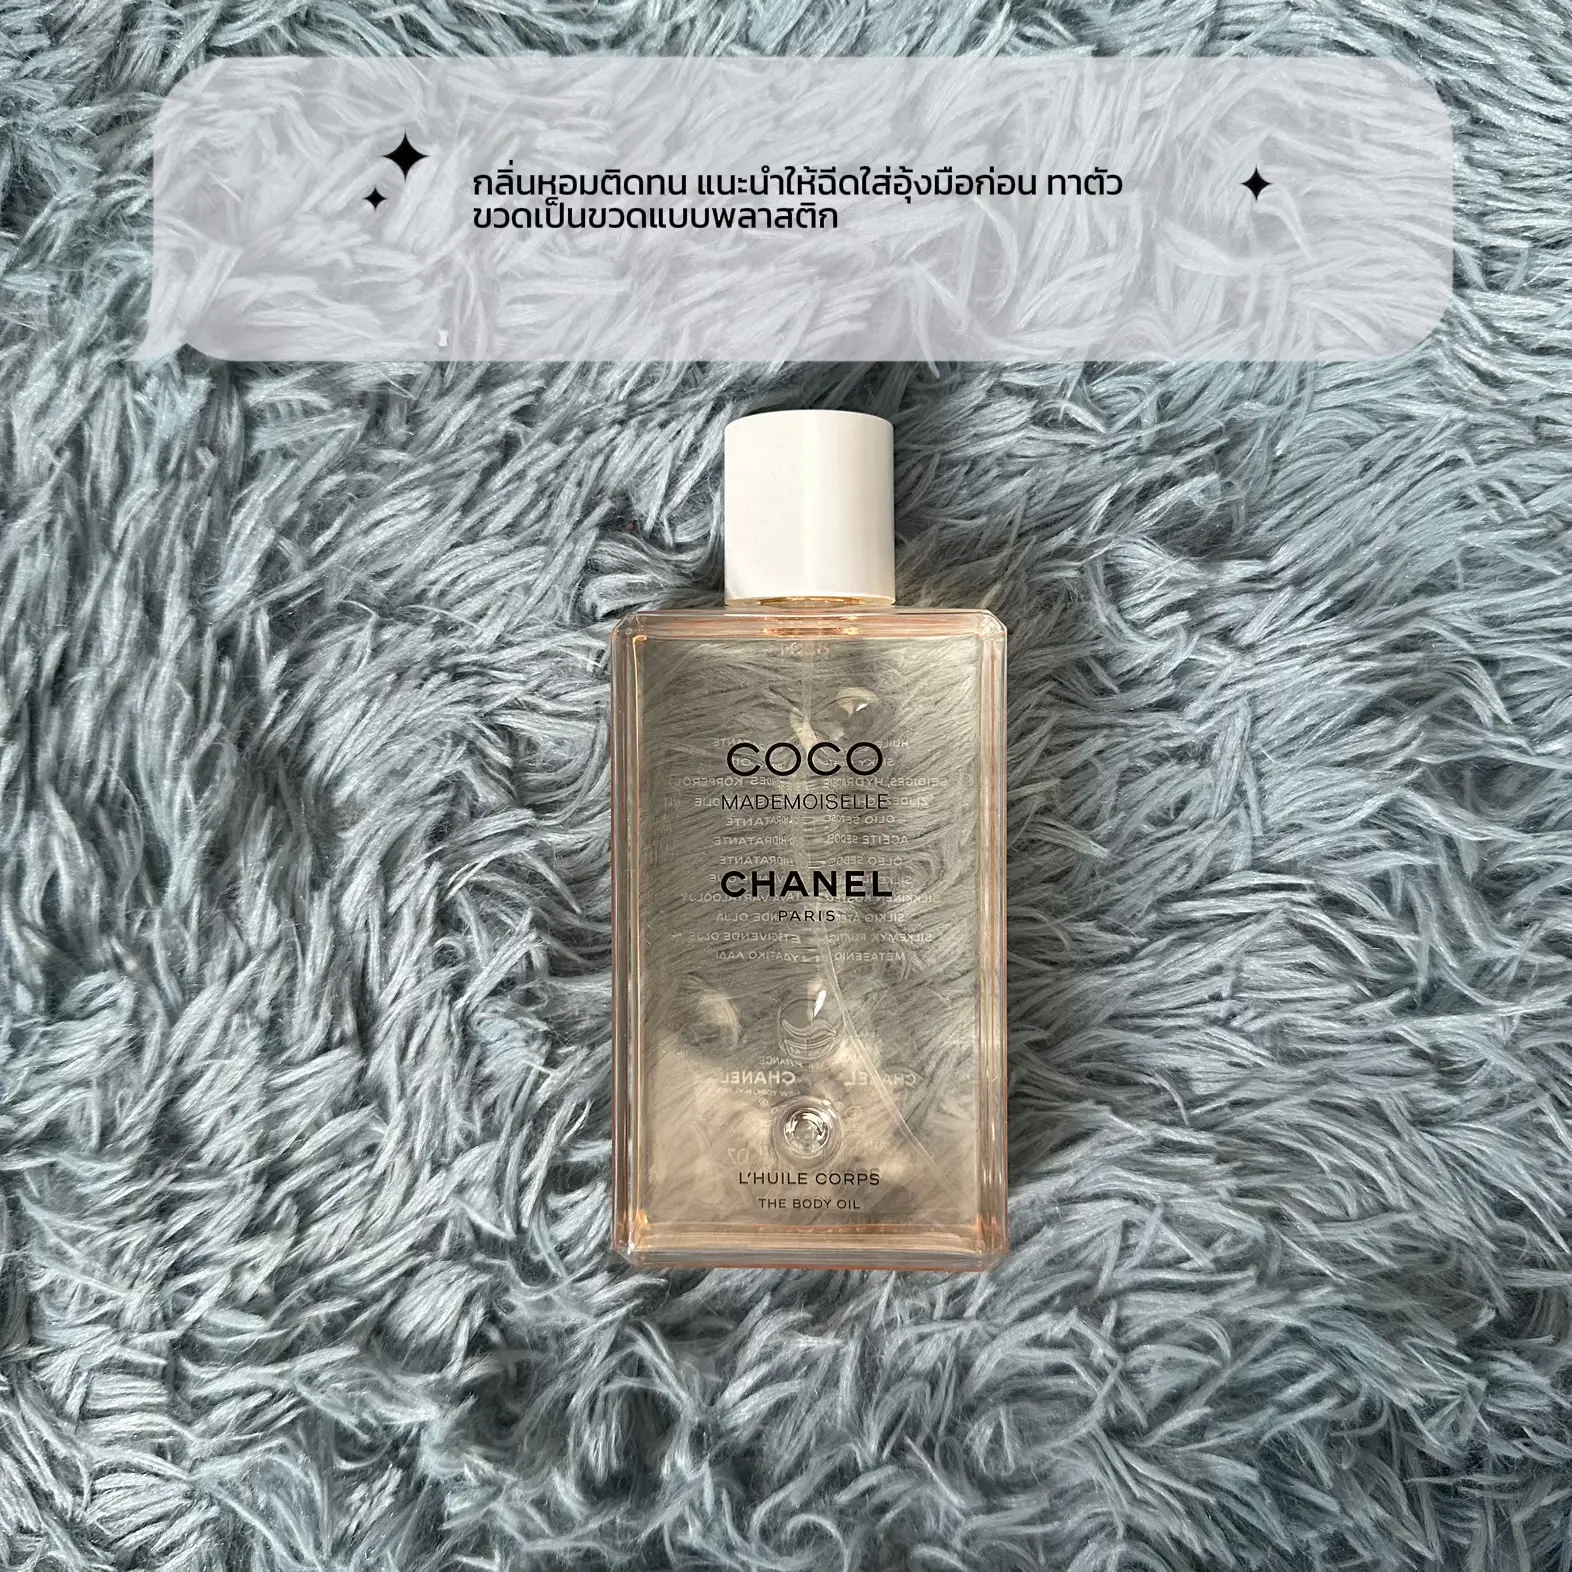 COCO CHANEL BODY OIL REVIEW, Gallery posted by Isandgrlsecret